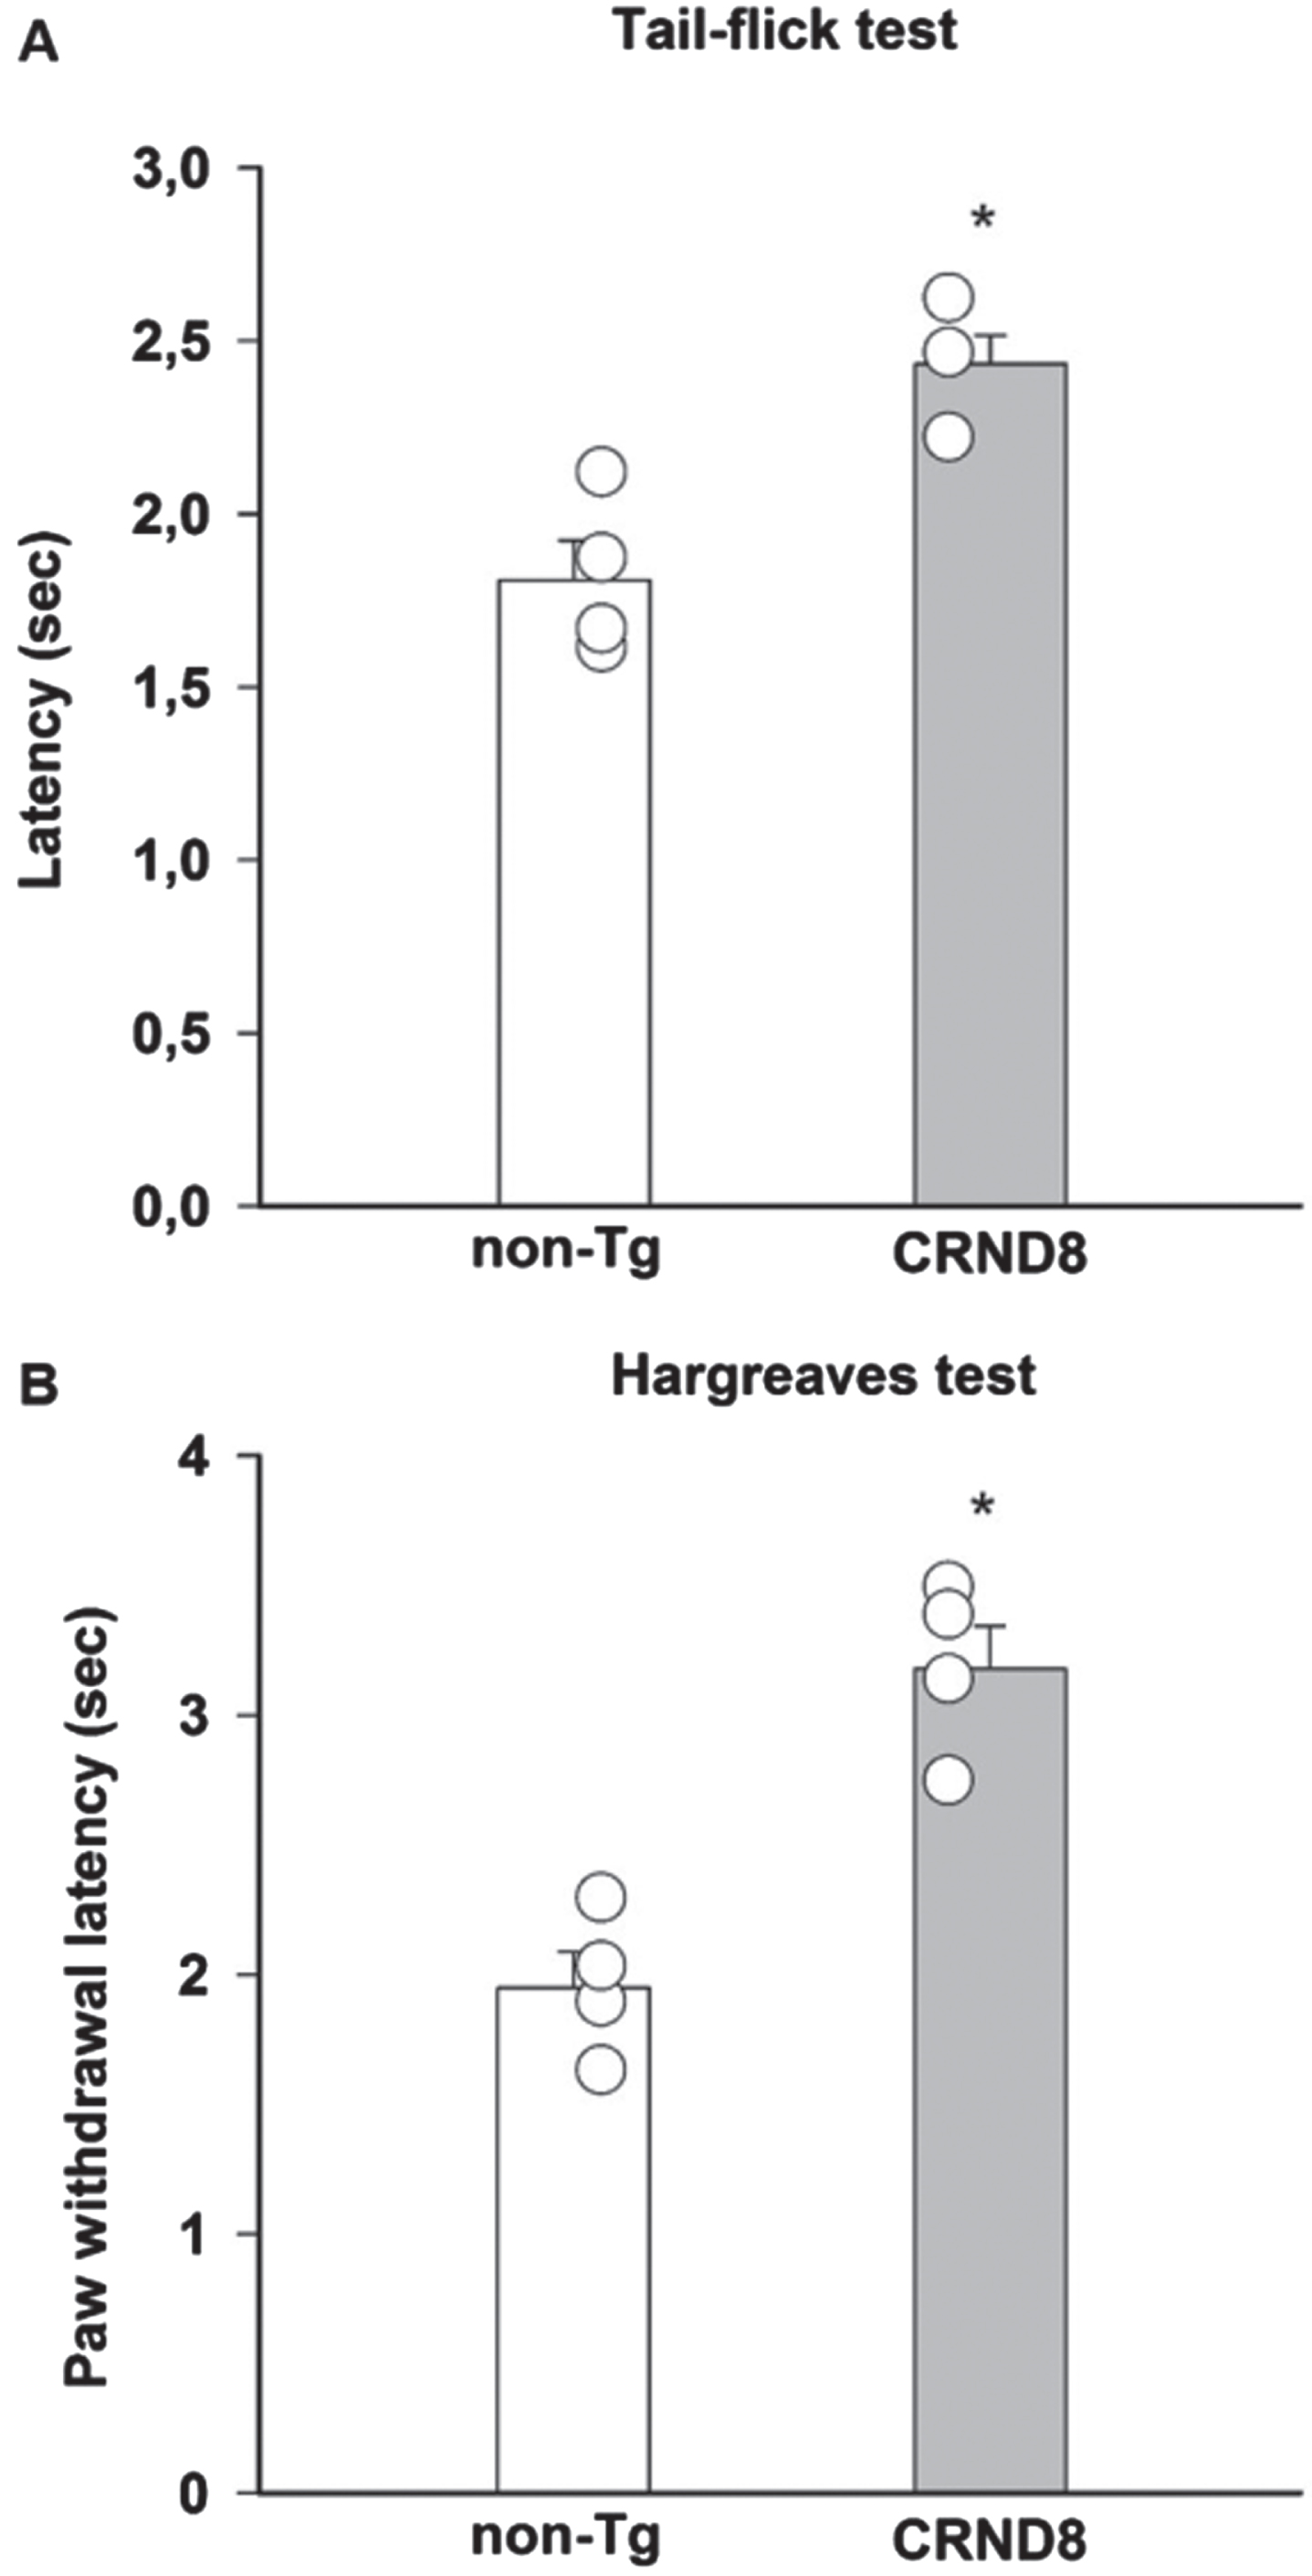 Reduced pain responses to noxious thermal stimulation in CRND8 mice. A significant increase of pain latency, induced by radiant heat light source and measured by tail-flick latency (A) and paw withdraw latency (Hargreaves, B), was observed in CRND8 mice compared to non-Tg mice (*p < 0.05, two-tailed t test). Data are represented as mean±SEM in bar graphs showing individual values (n = 4 per genotype).